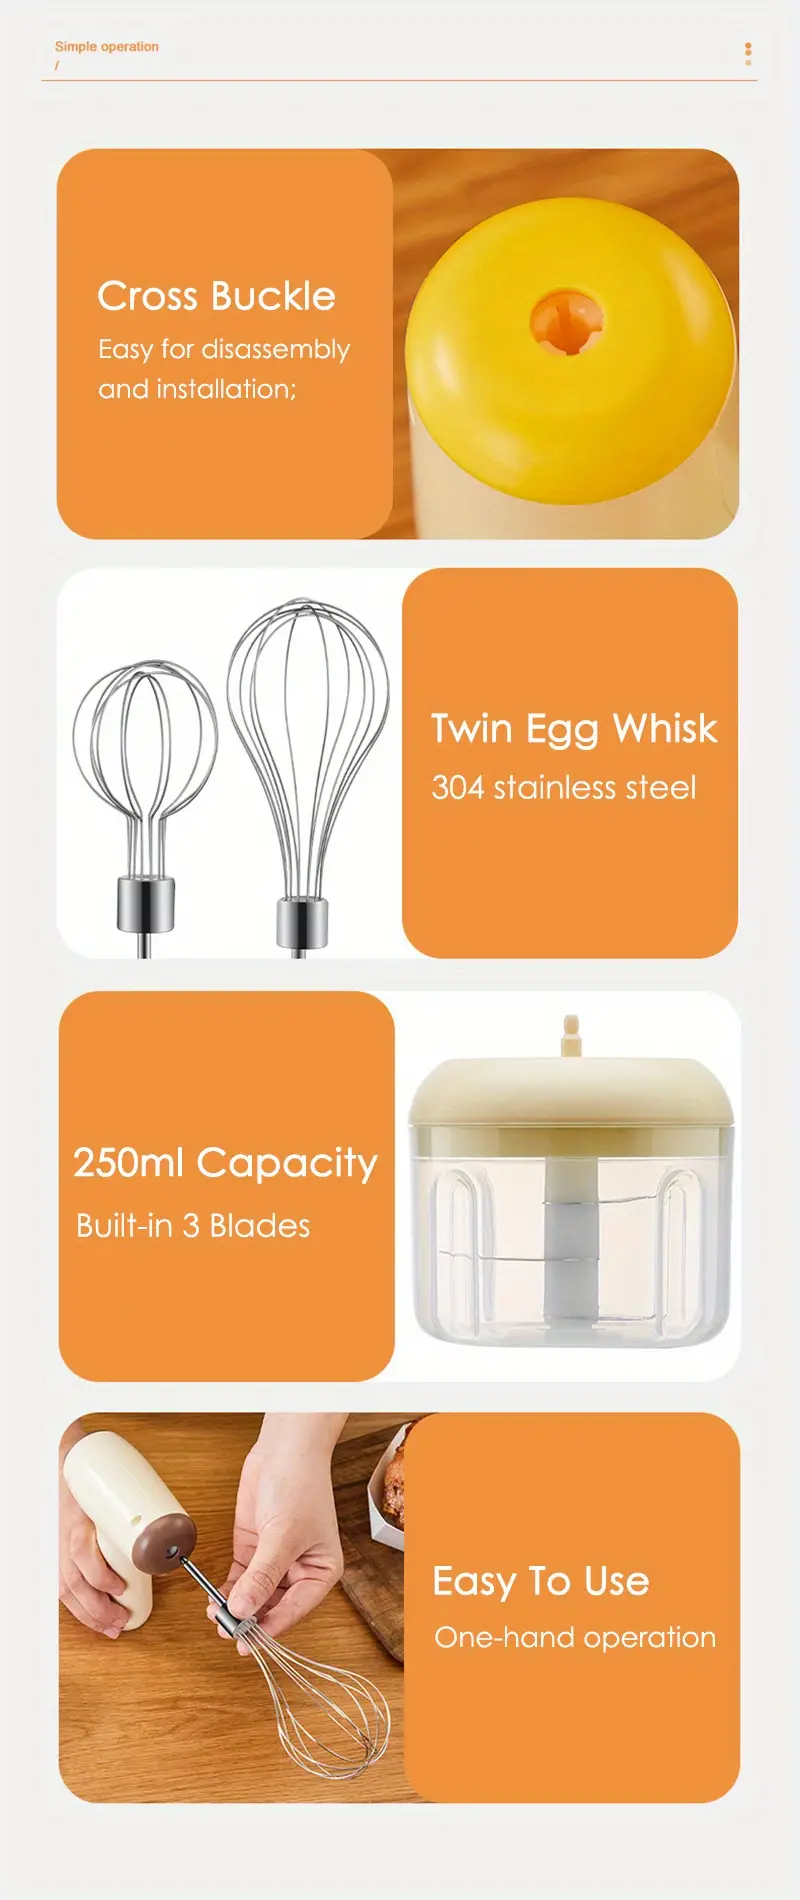 2in1 multi function cooking electric food processor rechargeable handheld cordless whisk egg beater cake baking cream mixer milk frother with two stir bar 250ml garlic chopper masher grinder for vegetable onion pepper peanut kernel meat kitchen tool details 11